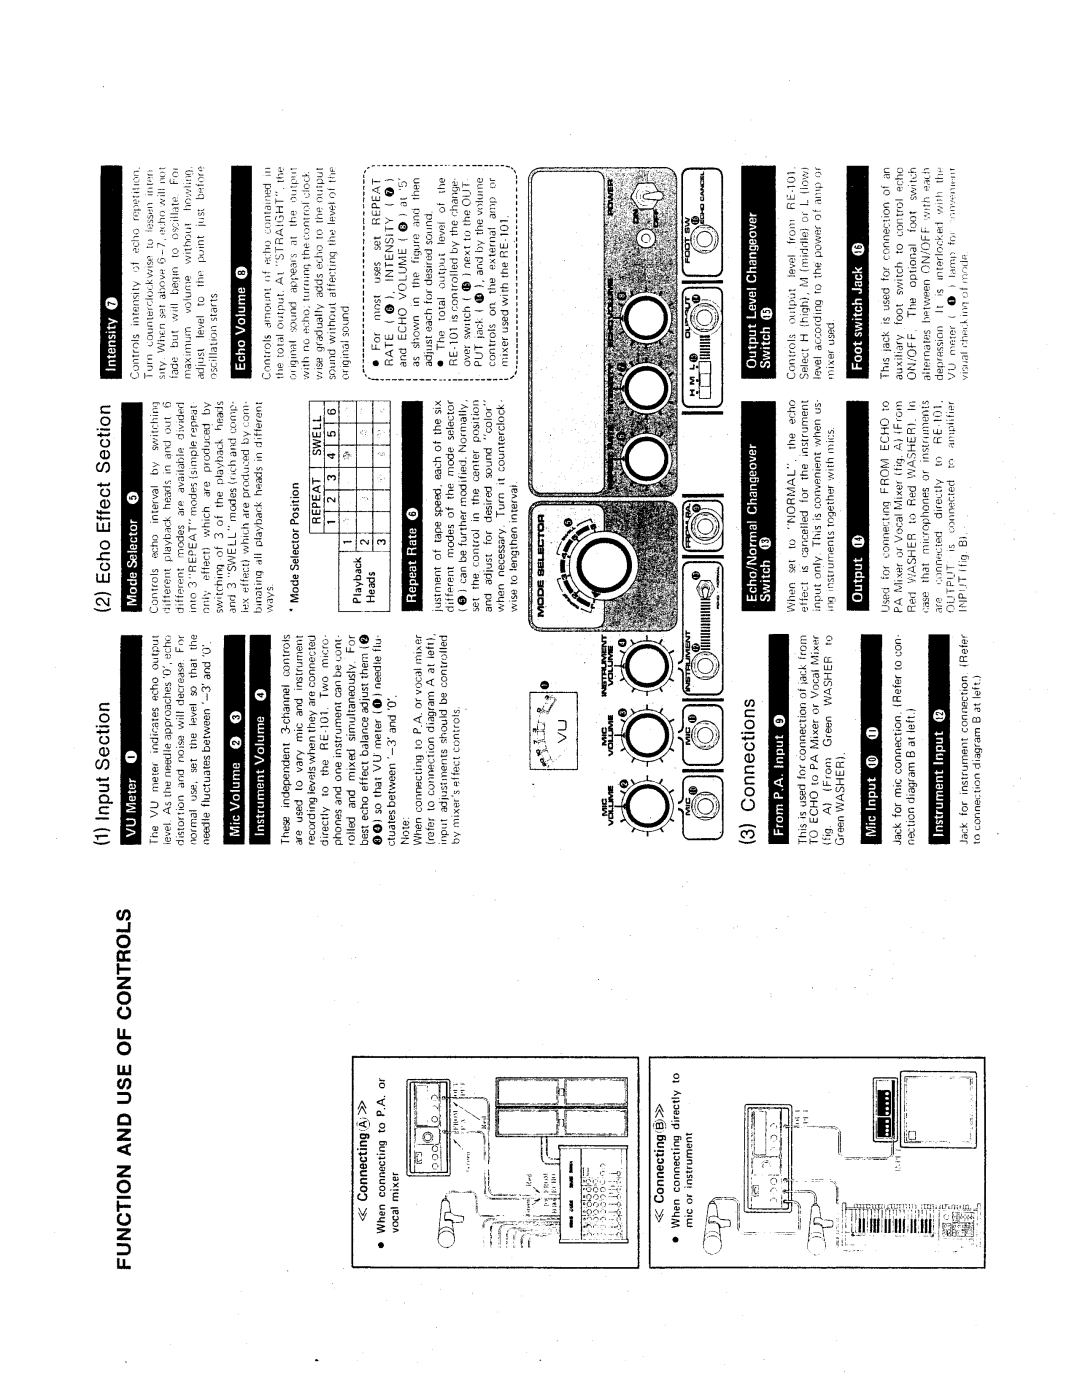 Roland RE-101 manual 